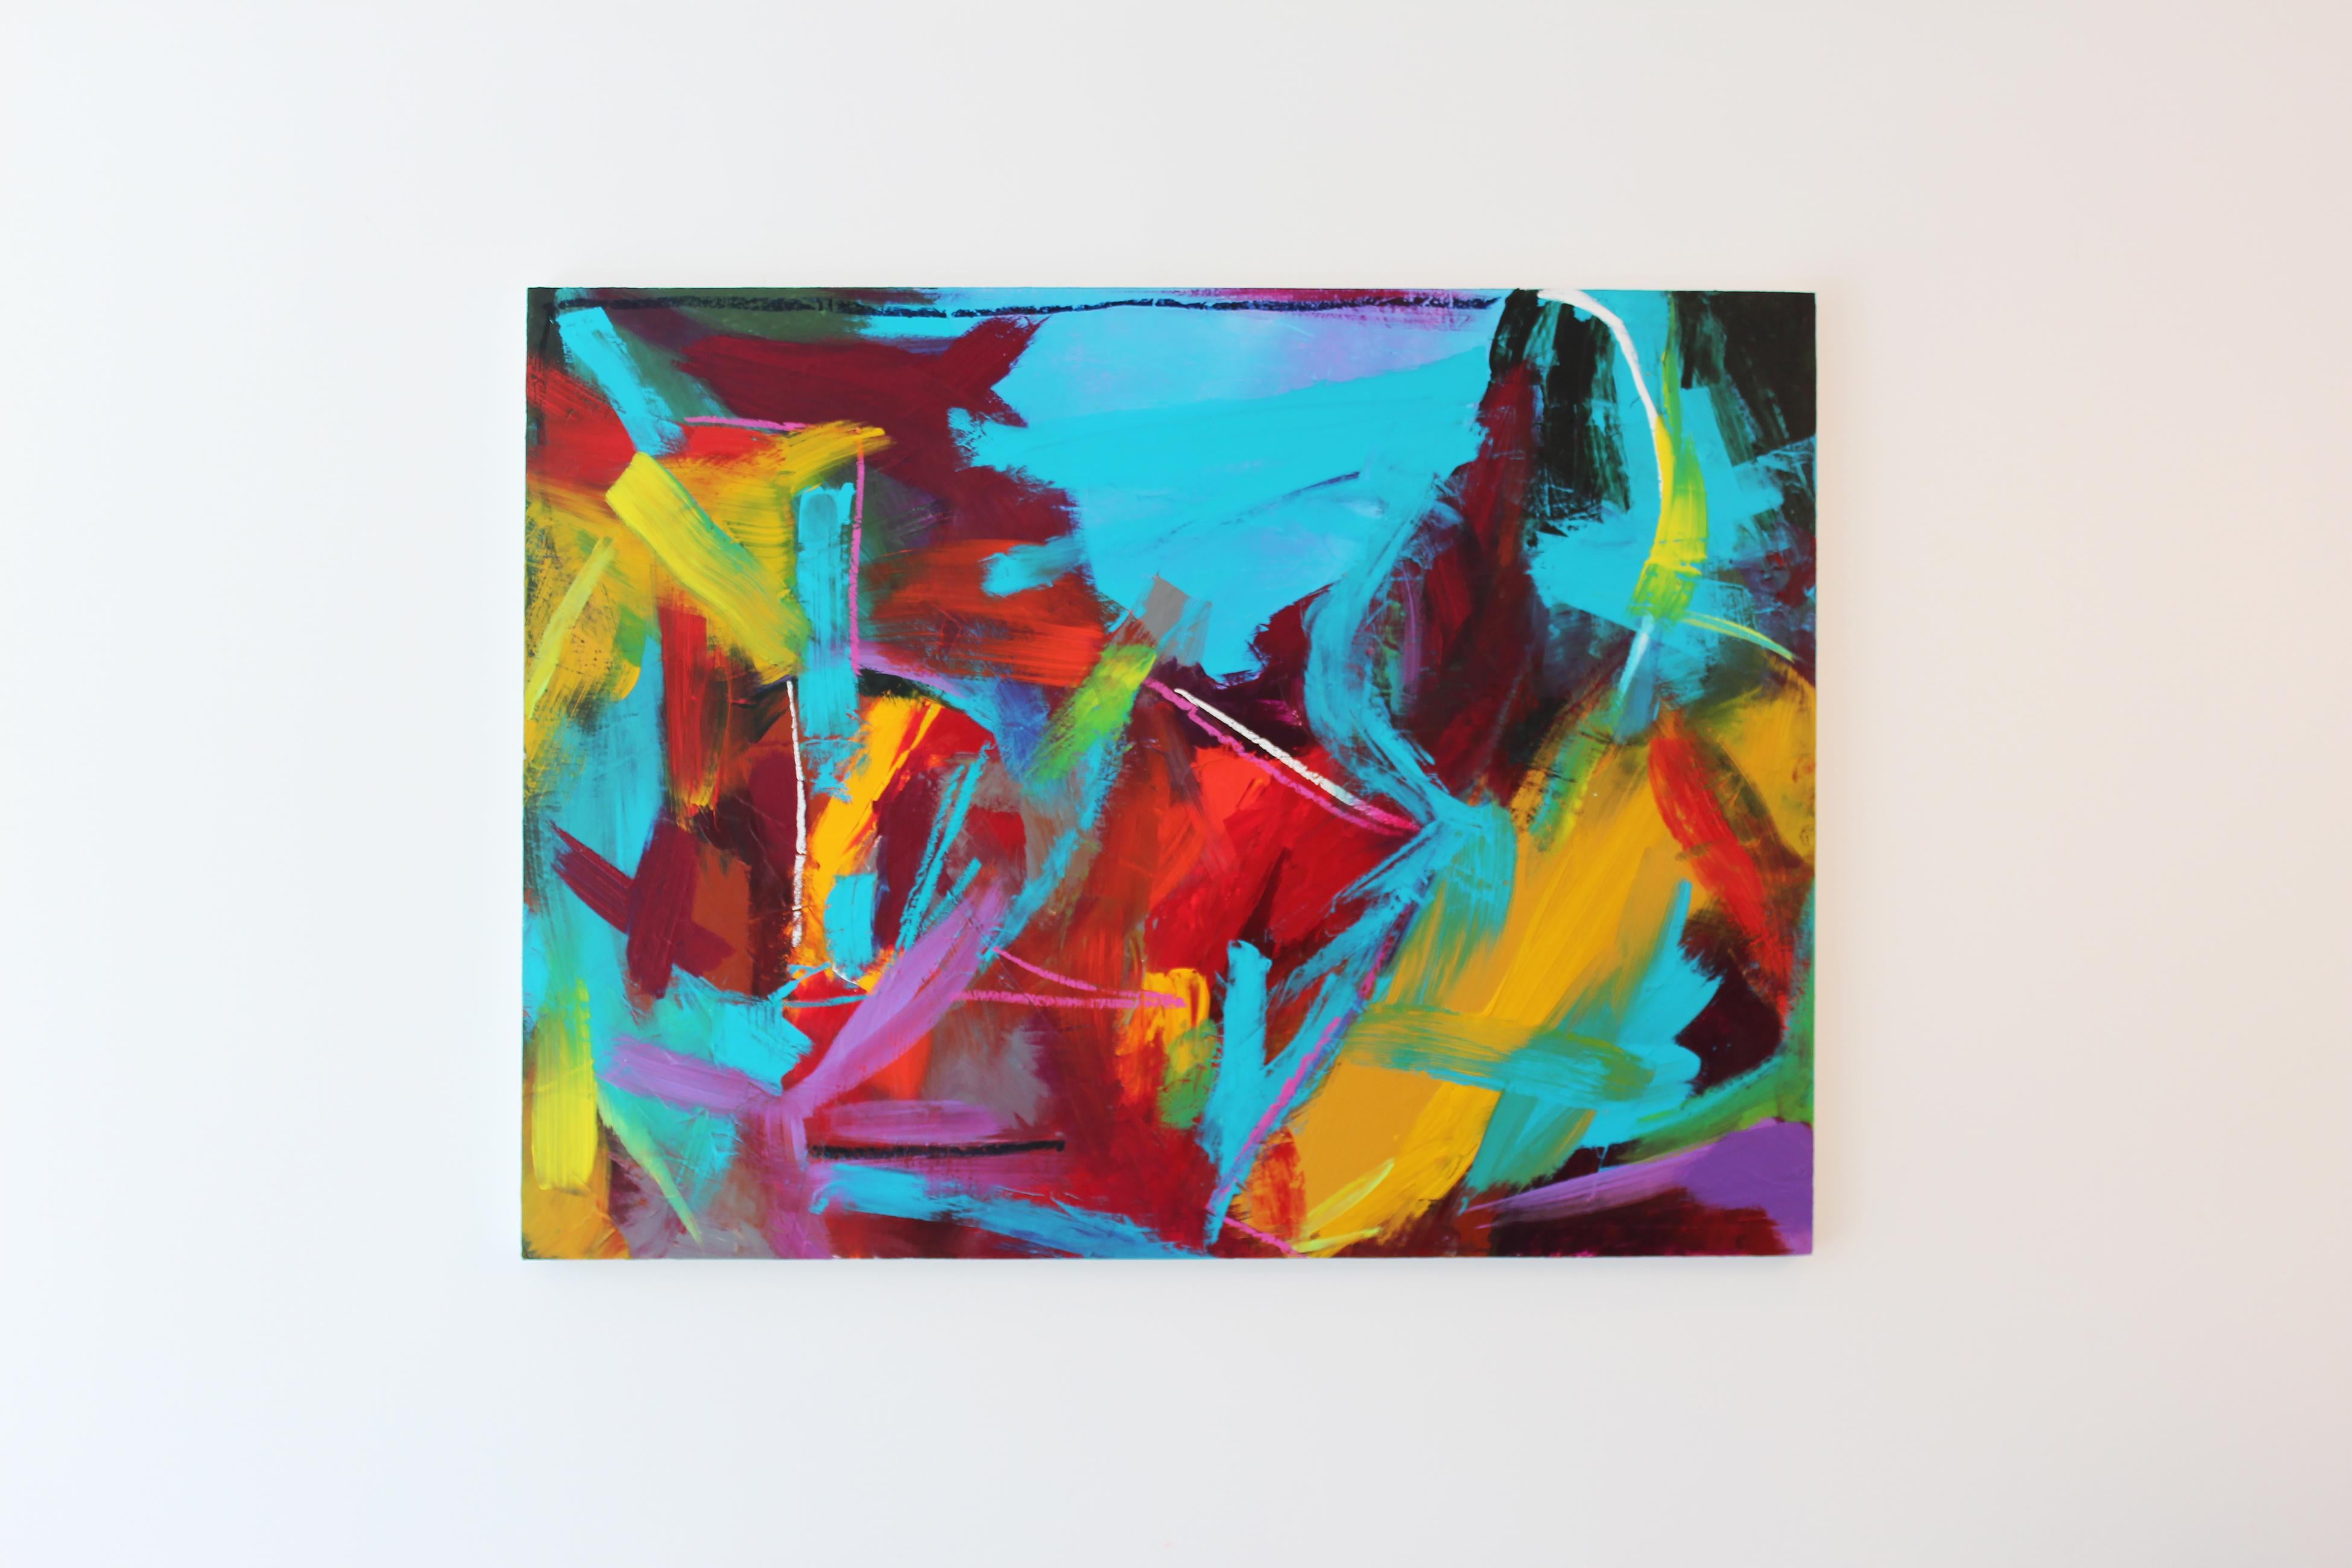 Jaqueline Jandrell Abstract Painting - "Pandemonium" - Acrylic and Oil Stick on Wood Panel